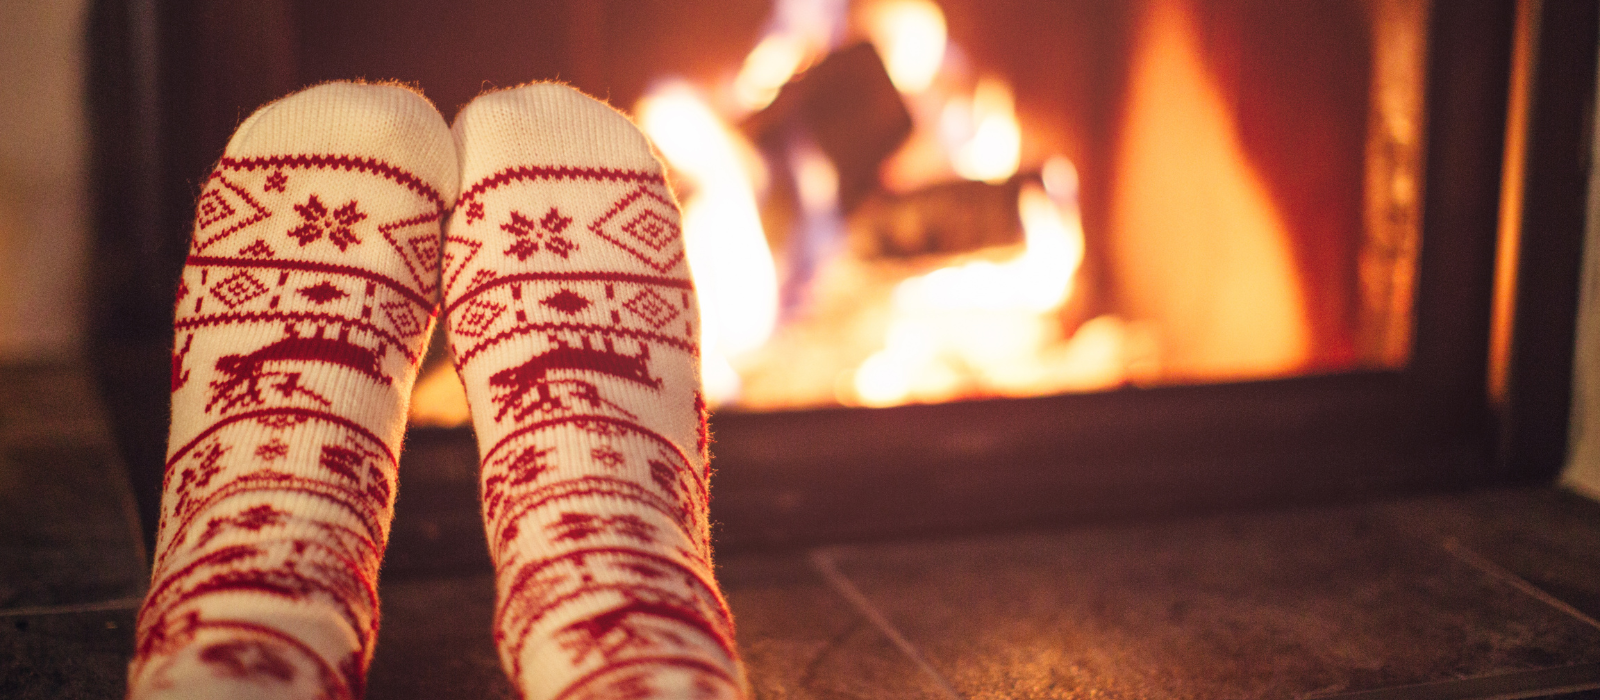 How to look after your wellbeing during the holiday season